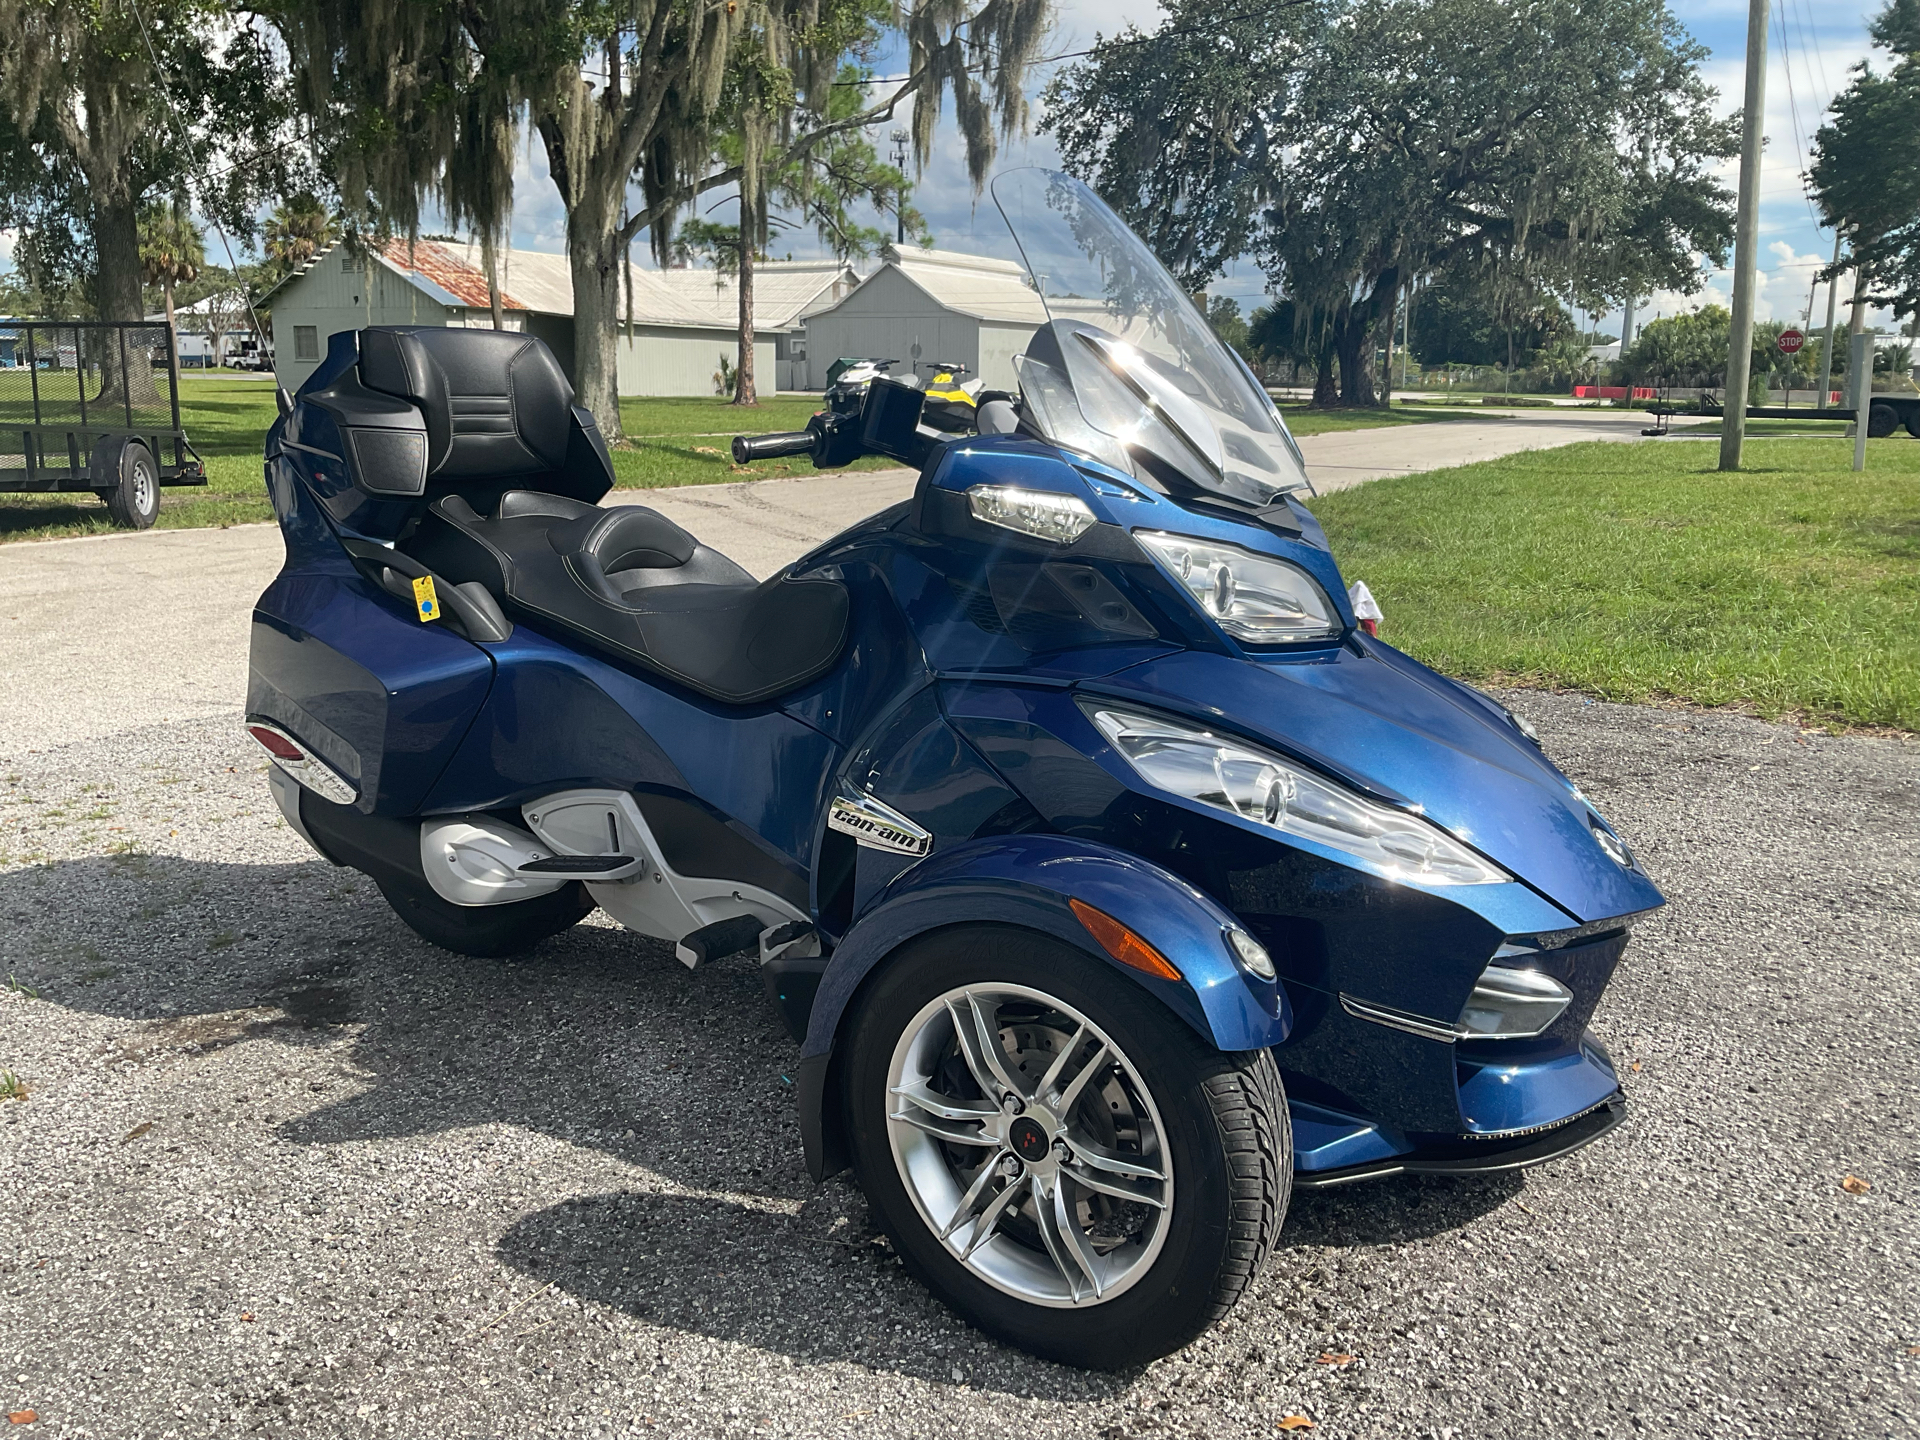 2011 Can-Am Spyder® RT-S SM5 in Sanford, Florida - Photo 2